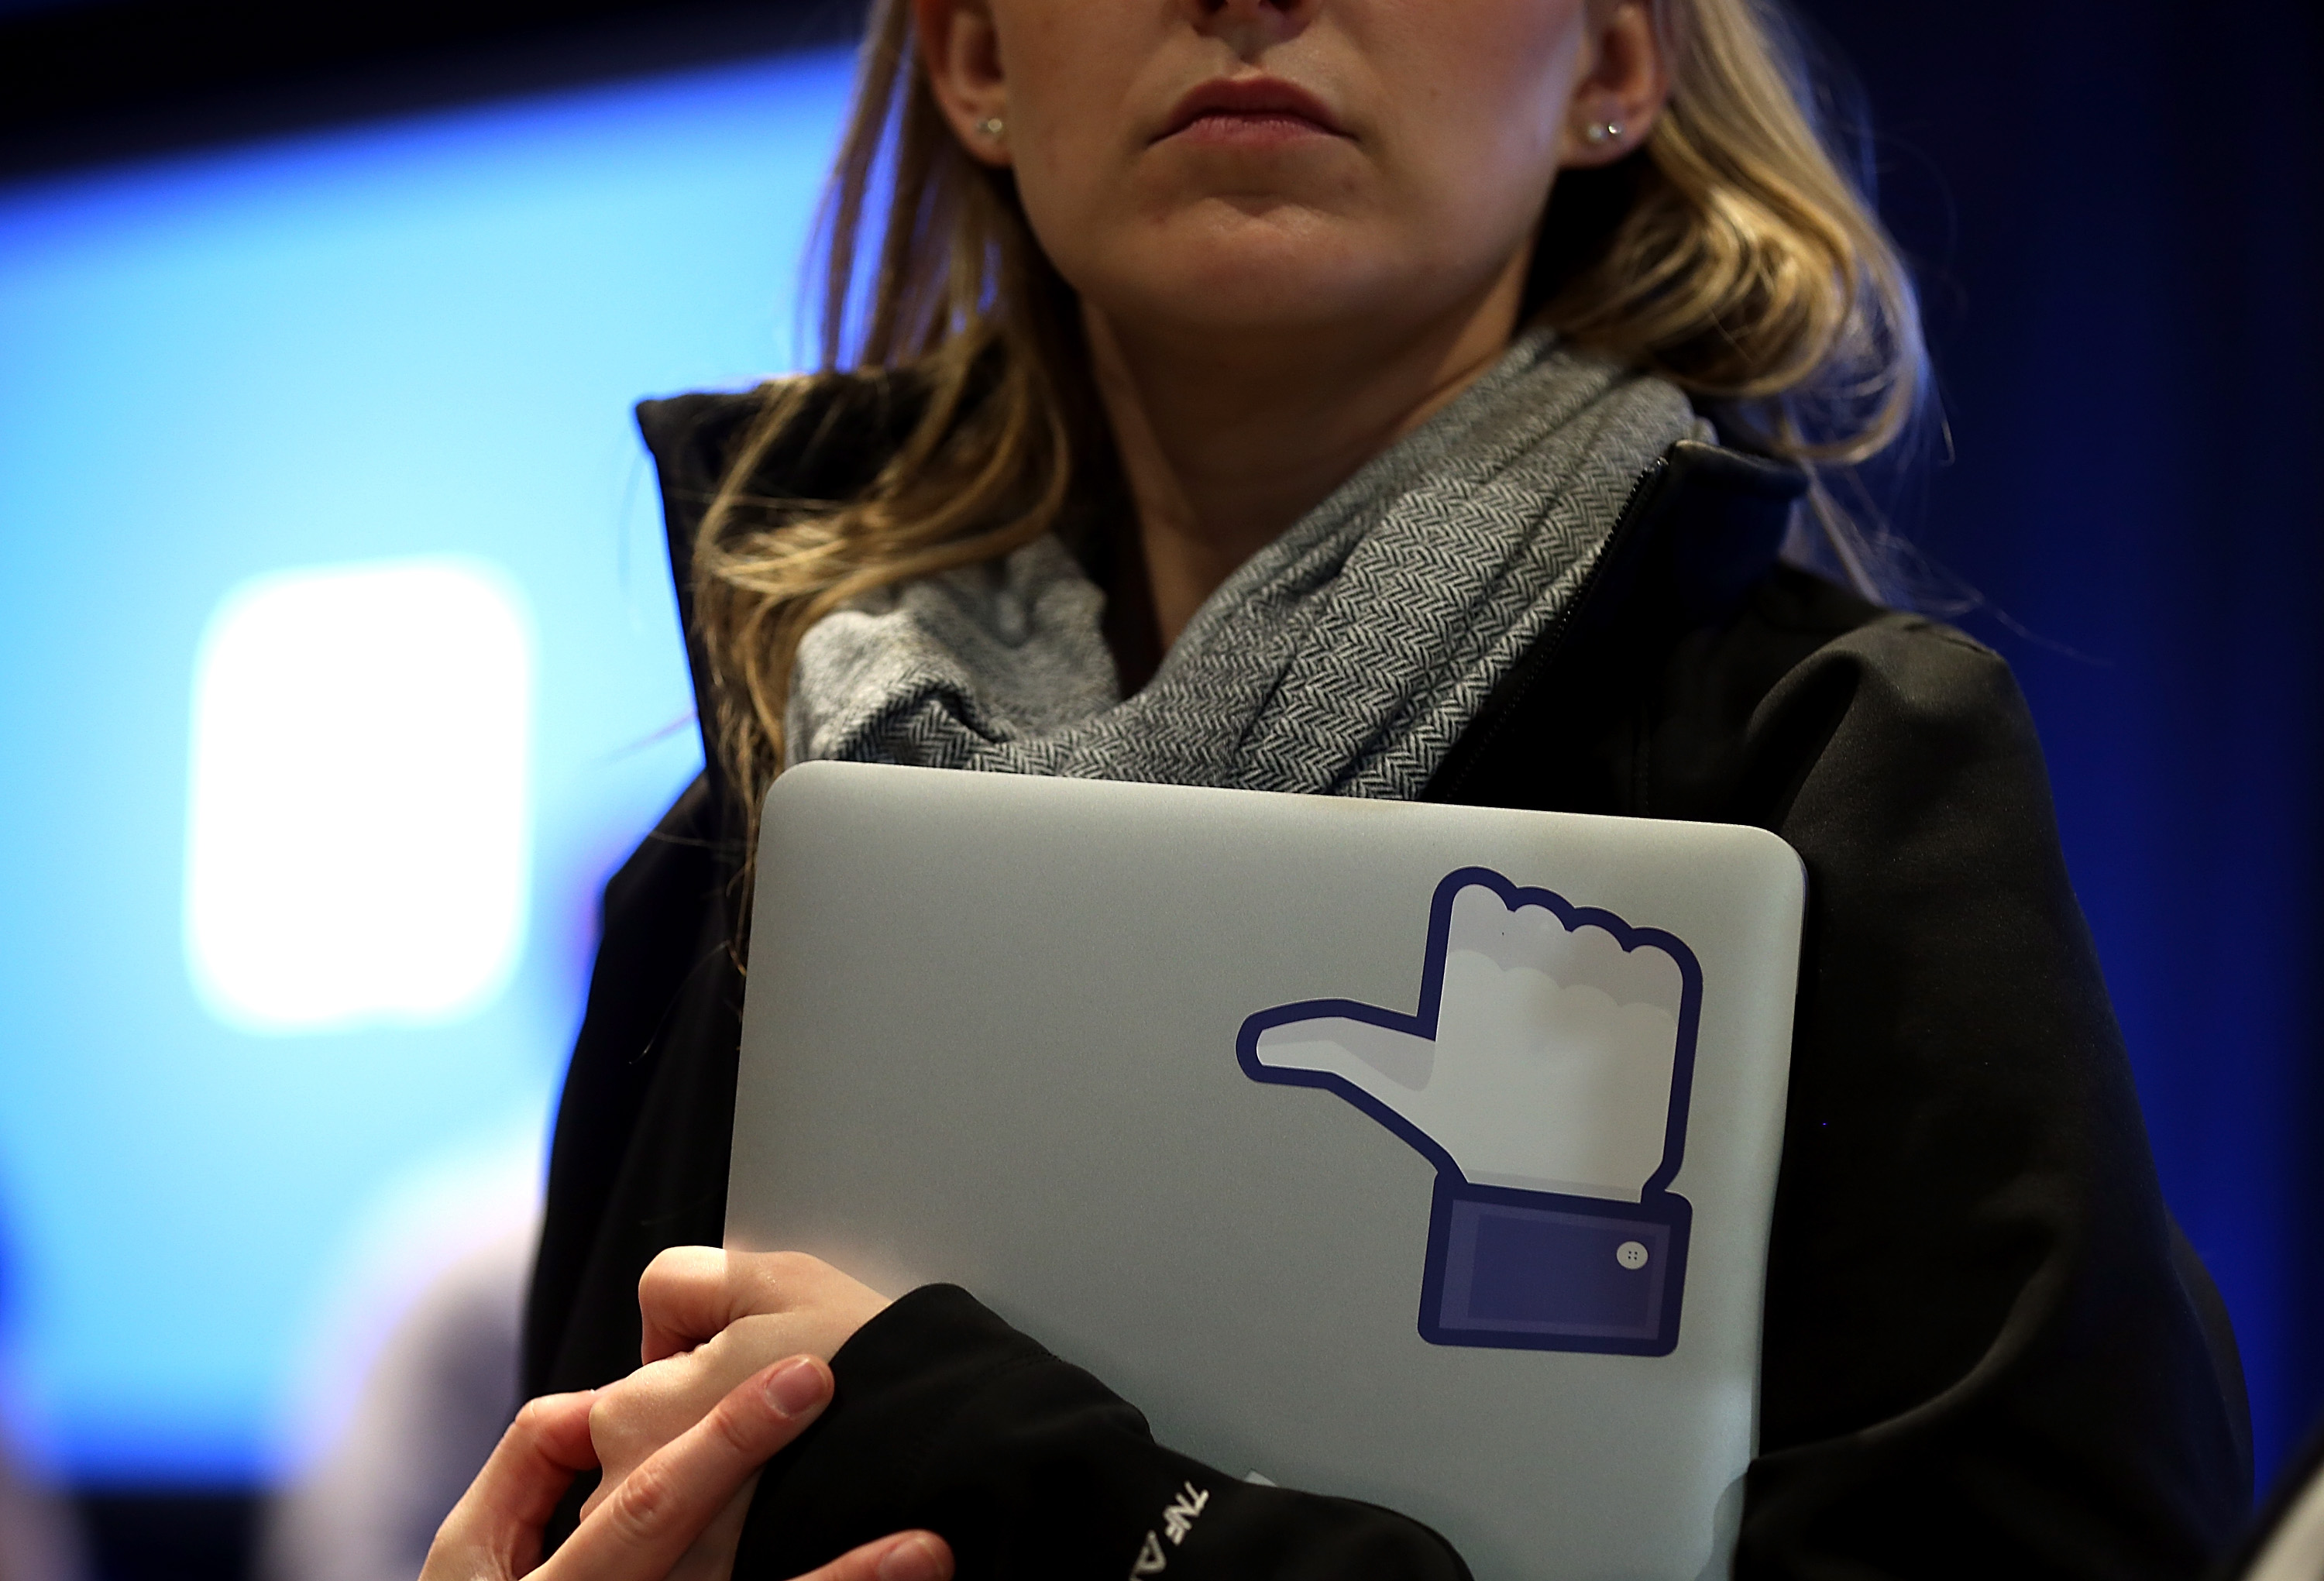 A Facebook employee holds a laptop with a "like" sticker on it during an event at Facebook headquarters during an event at Facebook headquarters on April 4, 2013 in Menlo Park, California. (Justin Sullivan&mdash;Getty Images)